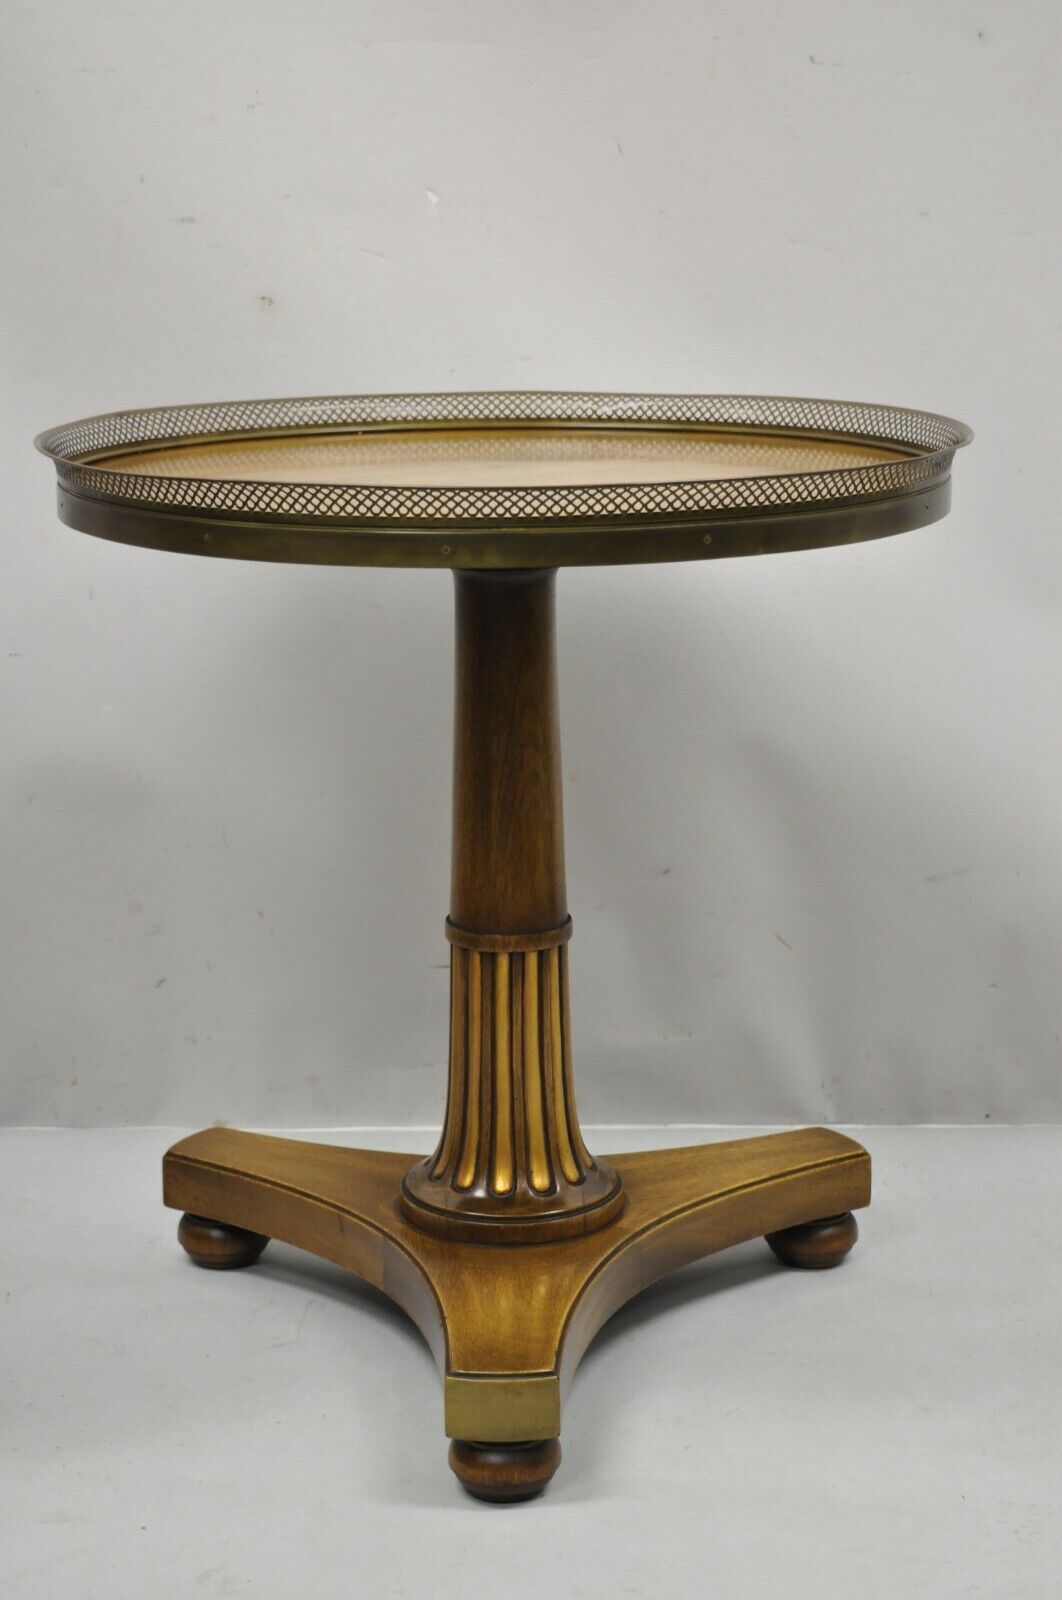 Vtg French Empire Mahogany Pedestal Base Round Accent Center Table Brass Gallery